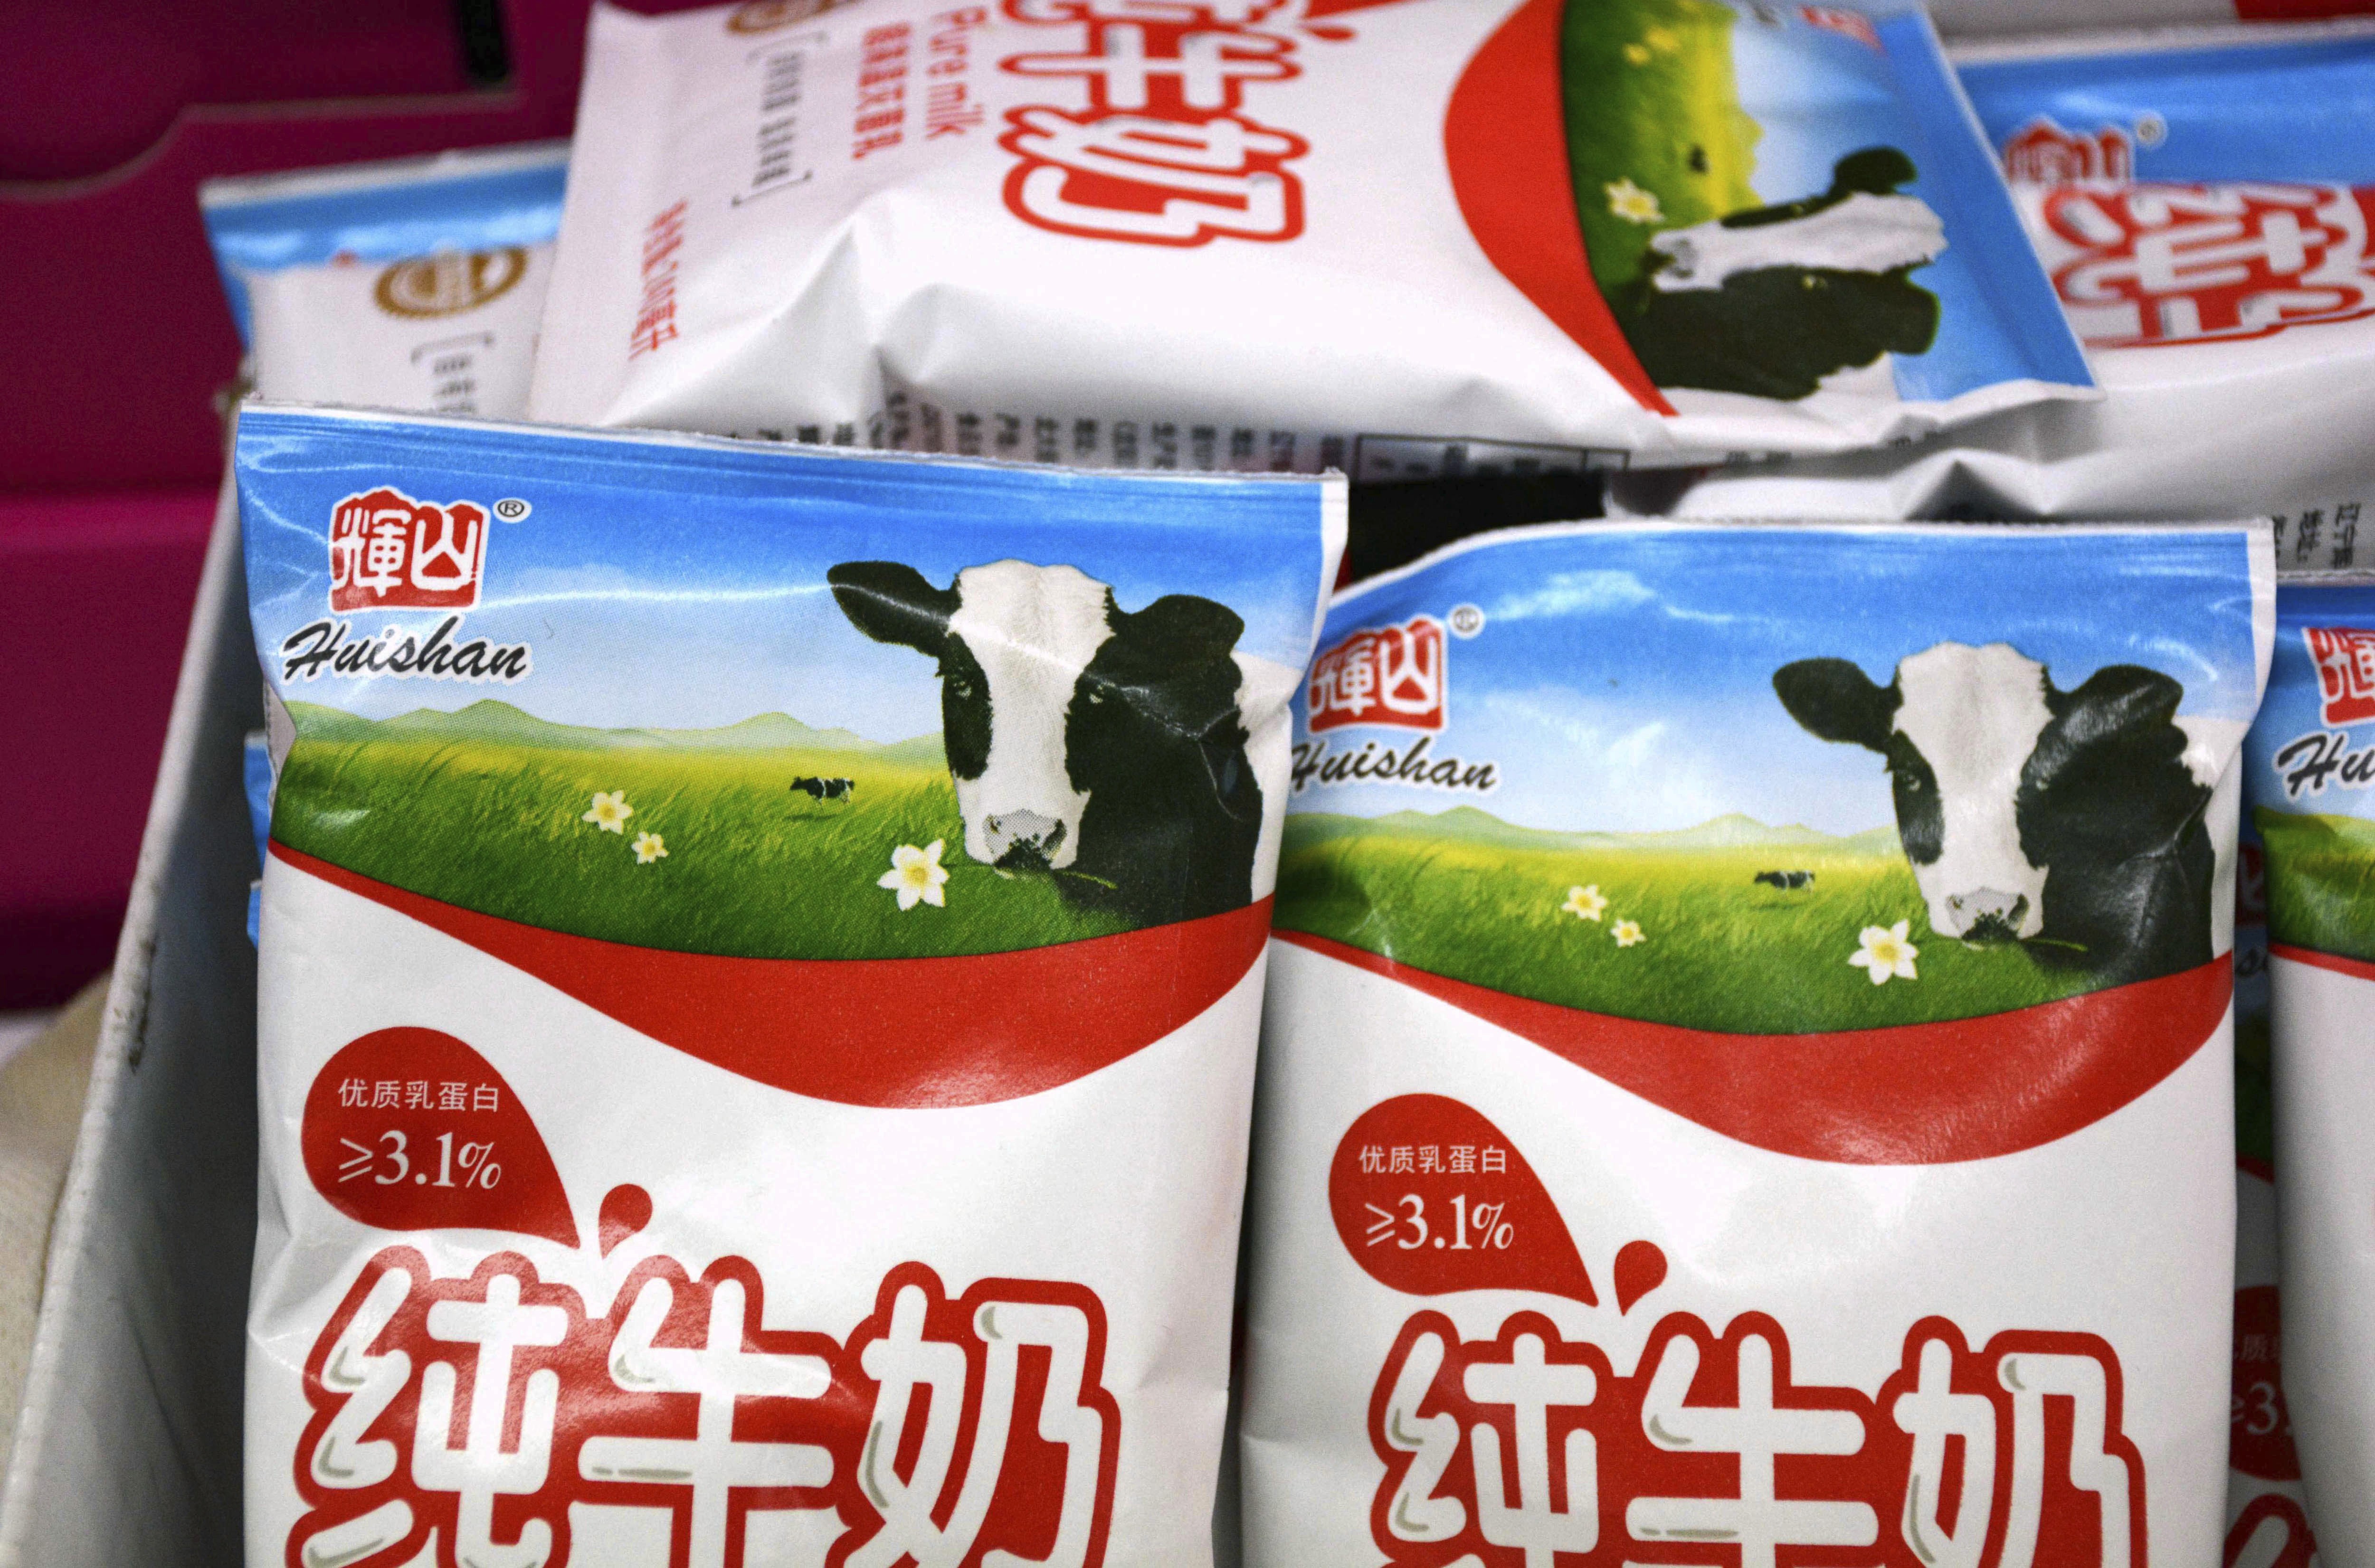 Its shares plunged 86pc in Hong Kong on March 24, which came as a vindication for many of its short sellers, including Muddy Waters, that accused it of overstating spending on dairy farms by as much as US$243 million